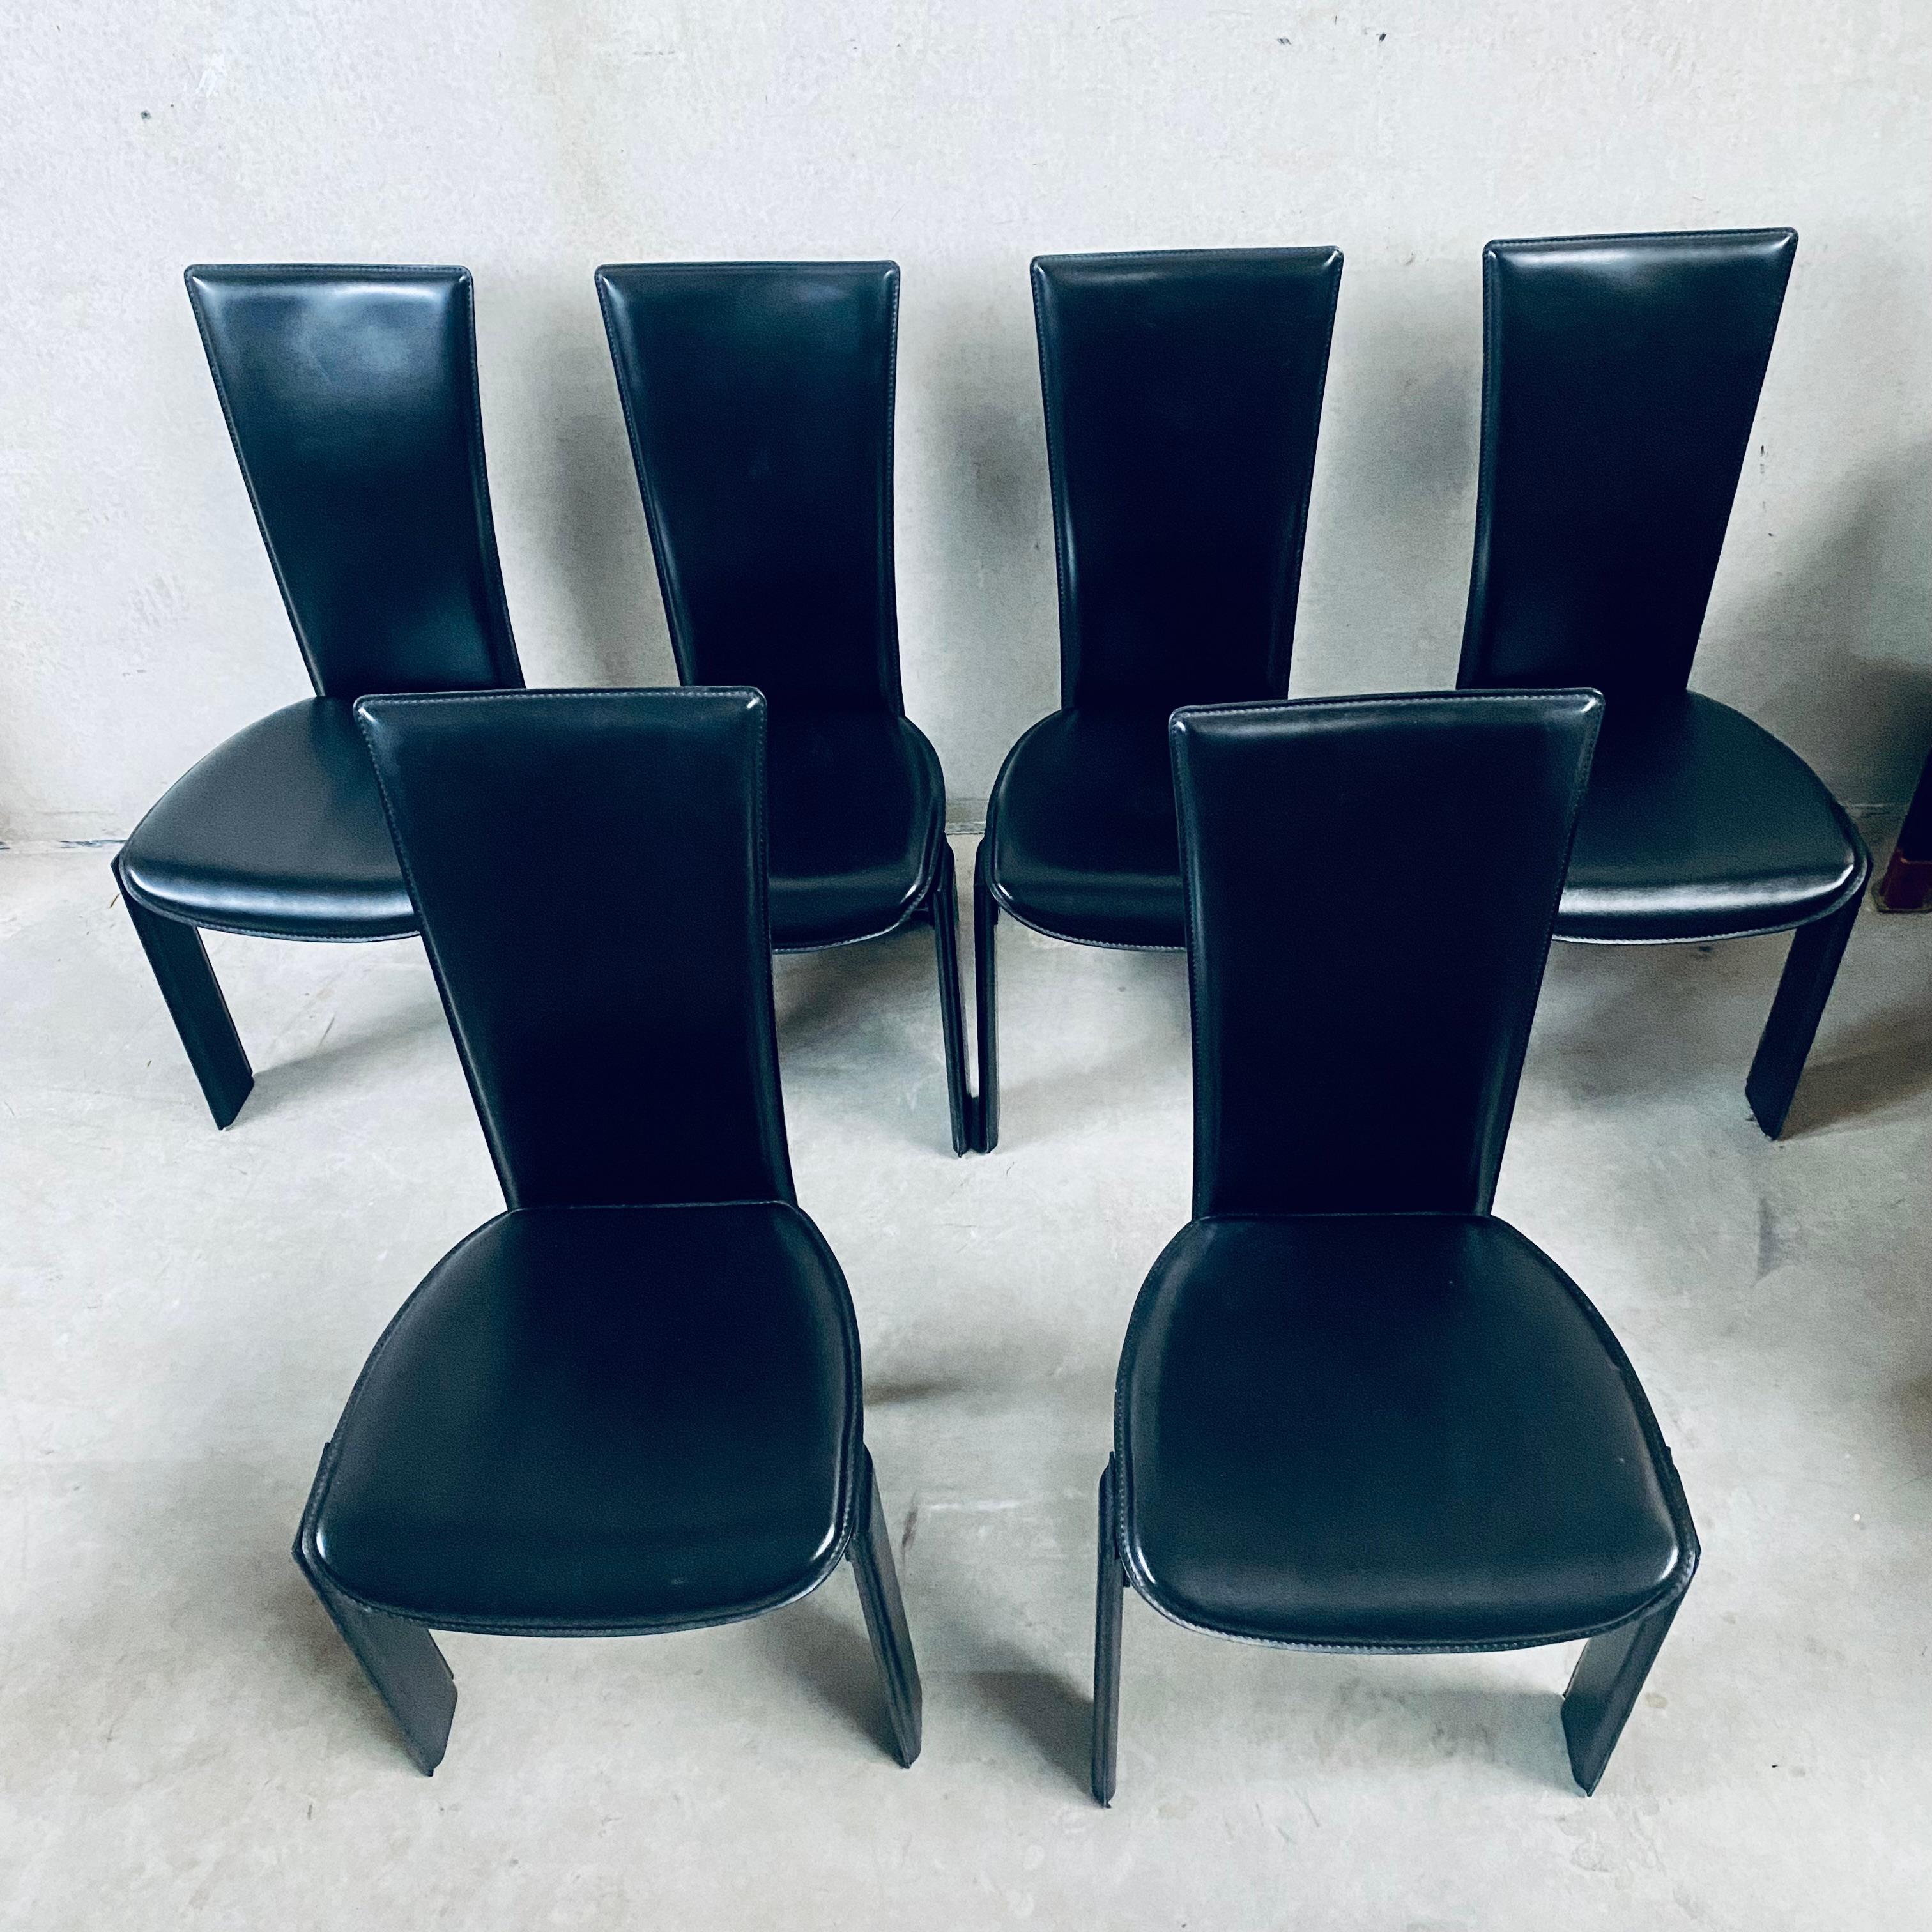 6 x Black Leather Tripot Dining Chairs by Pietro Costantini, Italy 1980 For Sale 2